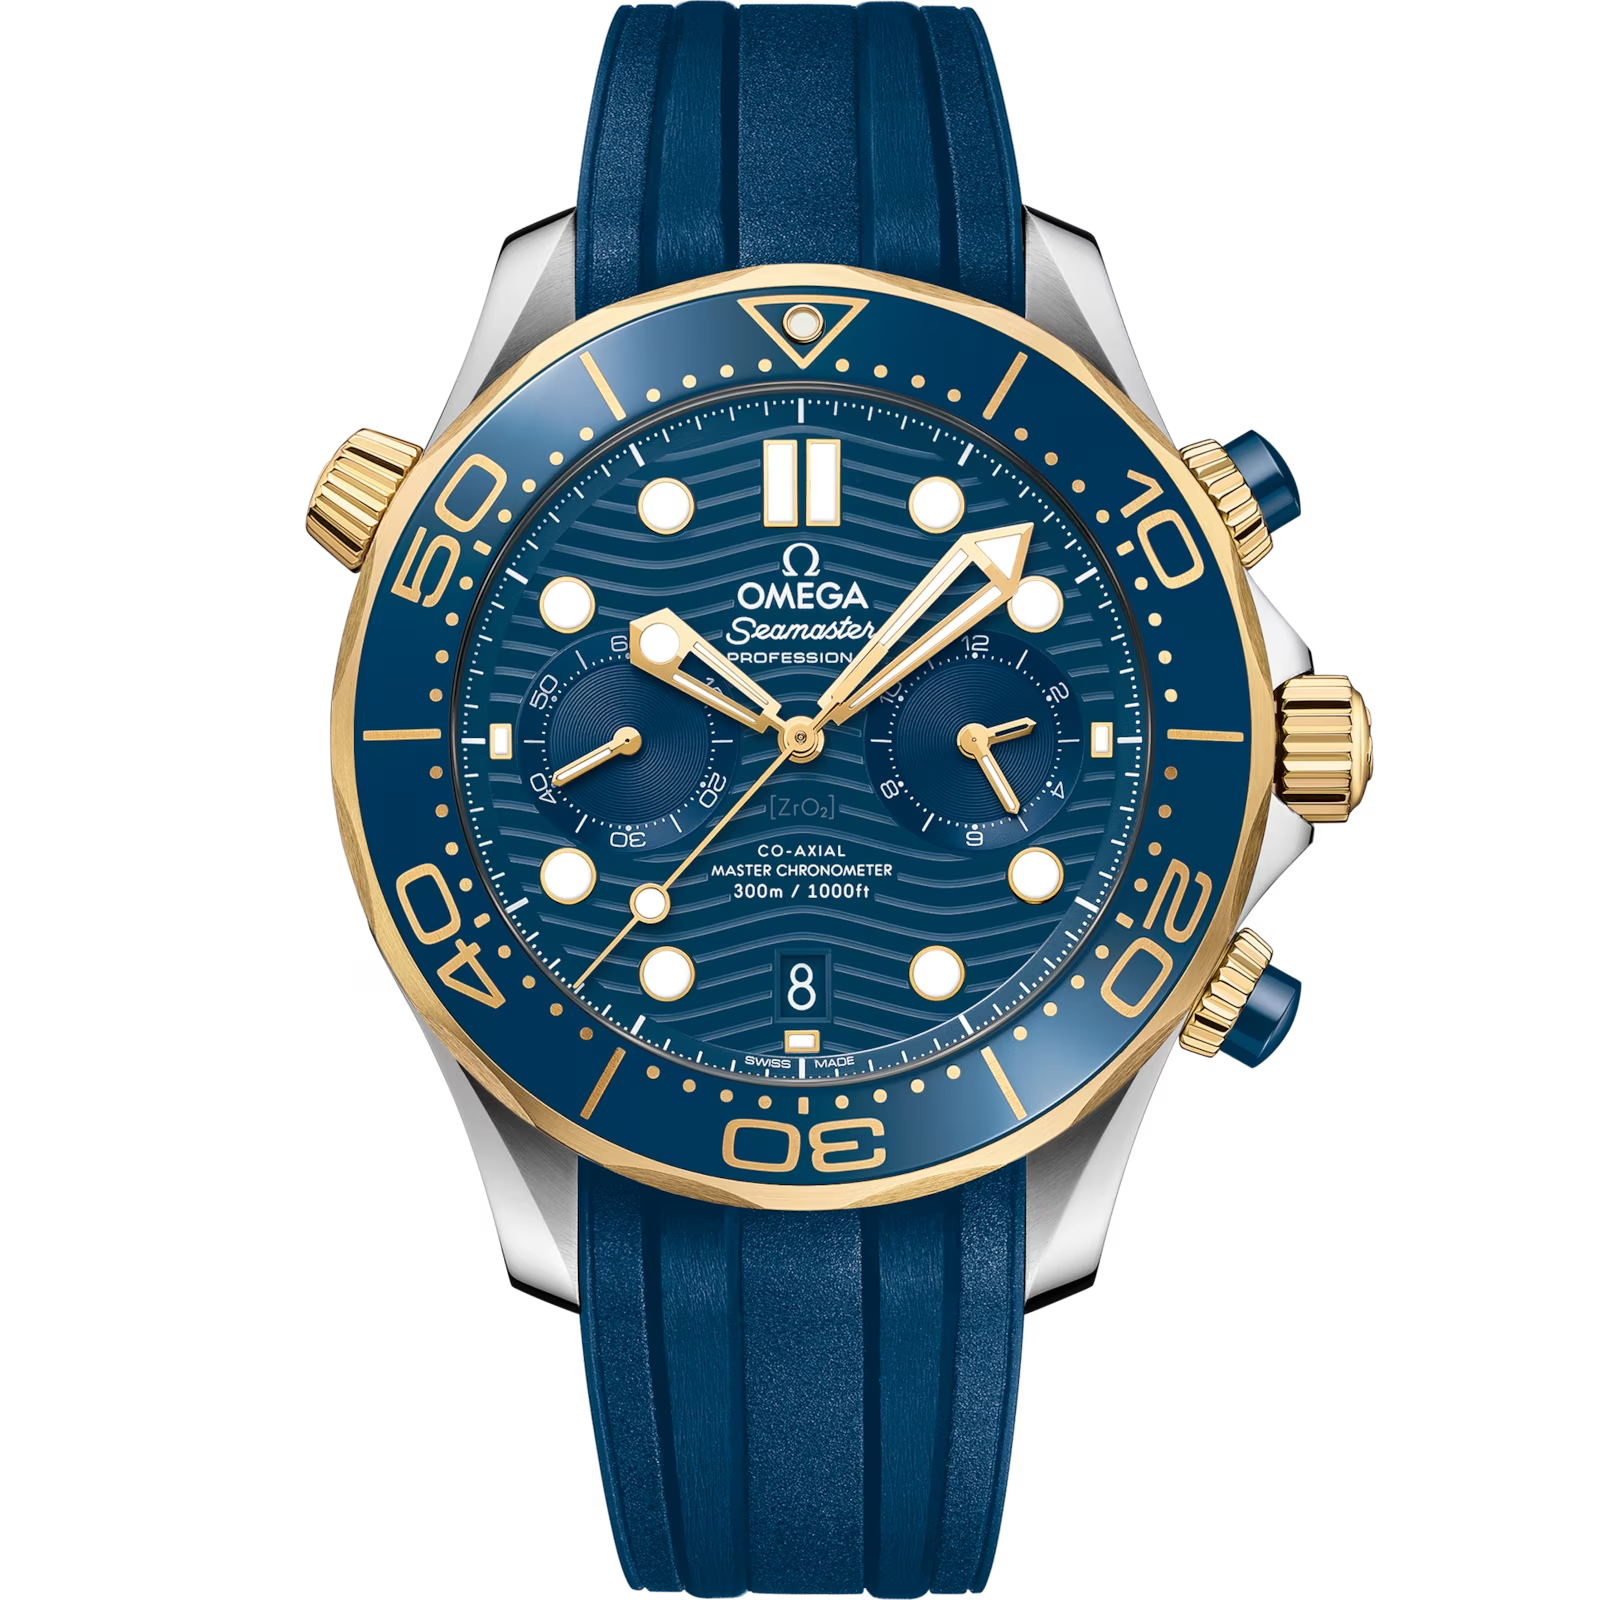 OMEGA-SEAMASTER DIVER 300M CO‑AXIAL MASTER CHRONOMETER CHRONOGRAPH 44 MM 210.22.44.51.03.001